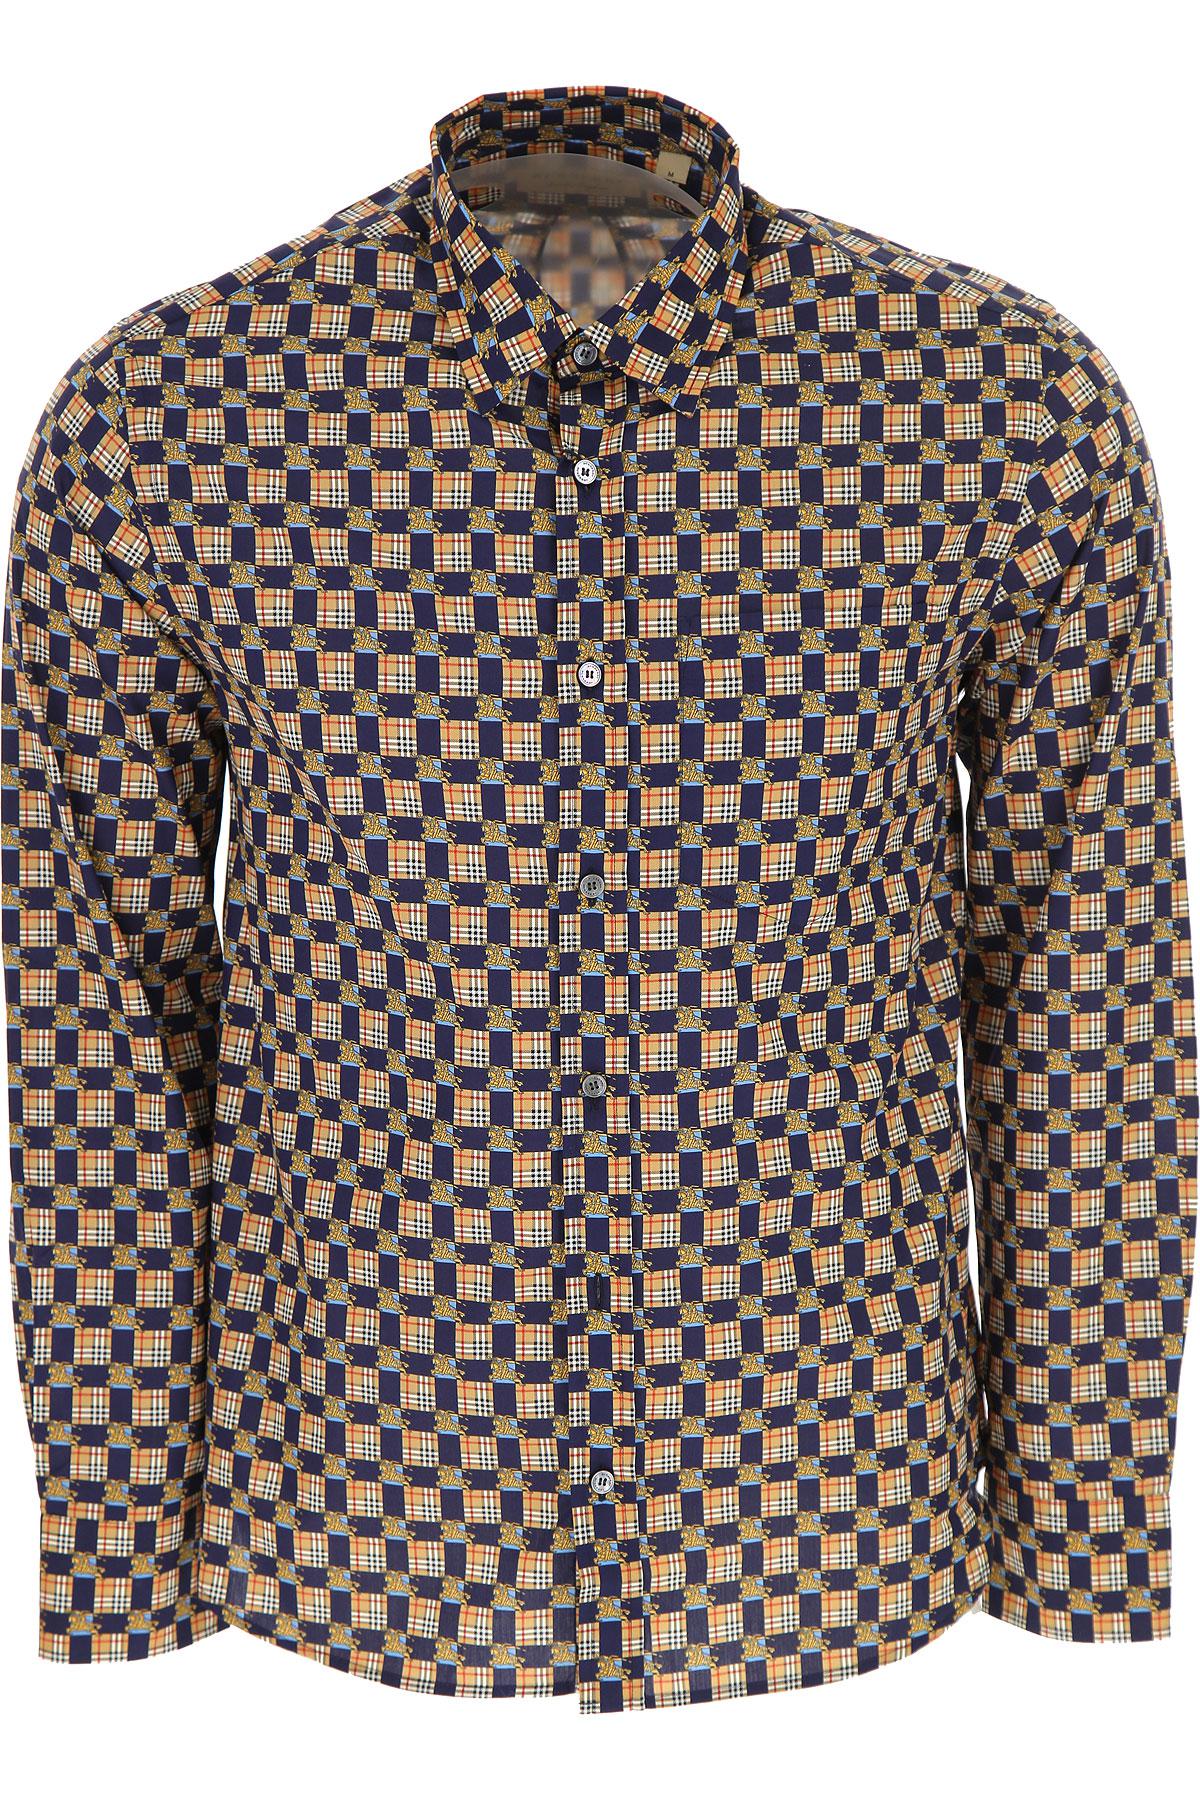 burberry casual shirts sale